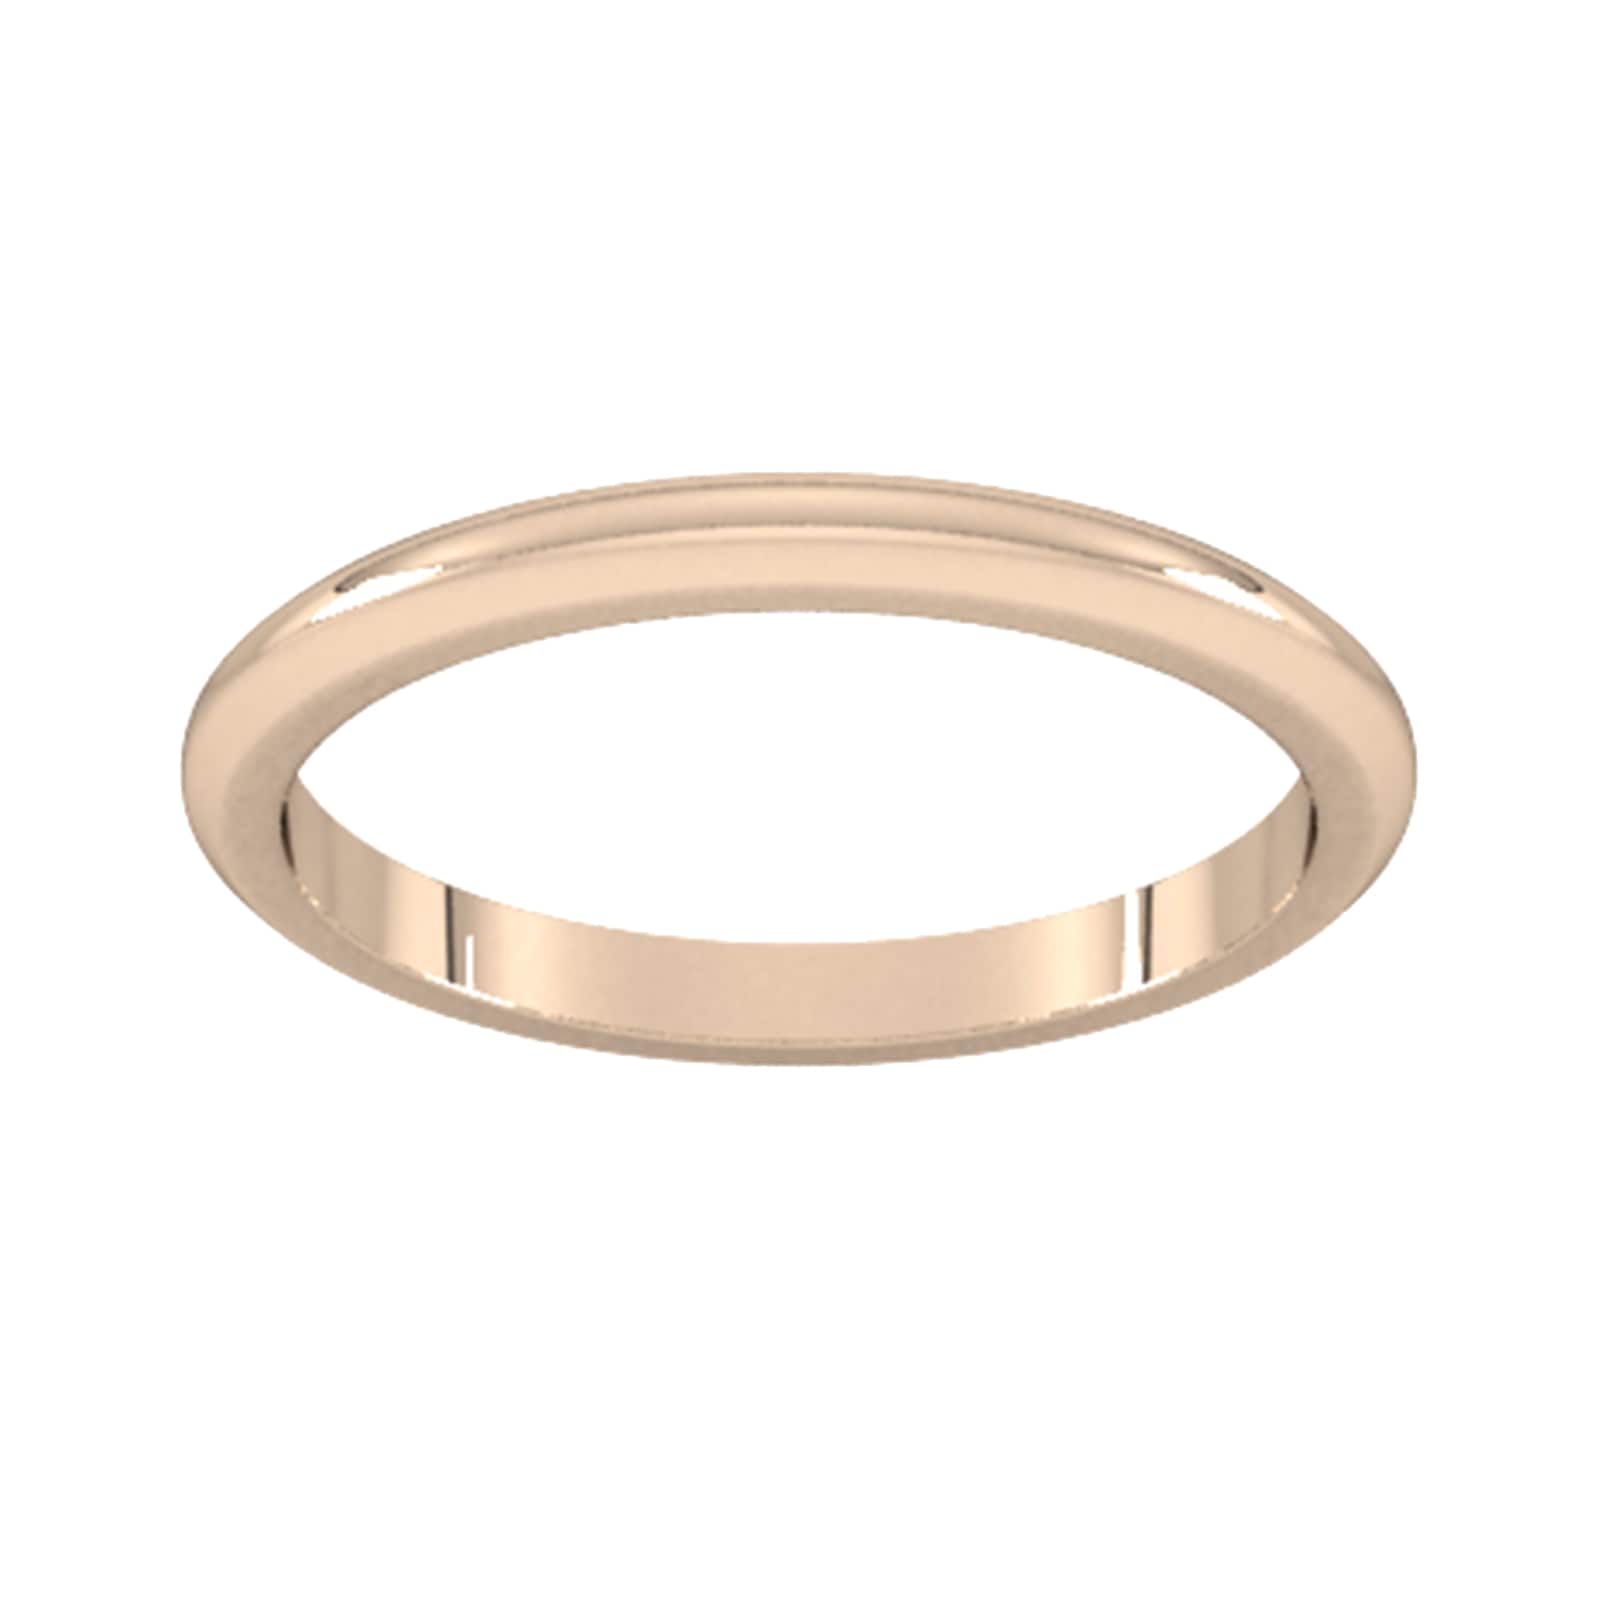 2mm D Shape Heavy Wedding Ring In 18 Carat Rose Gold - Ring Size M